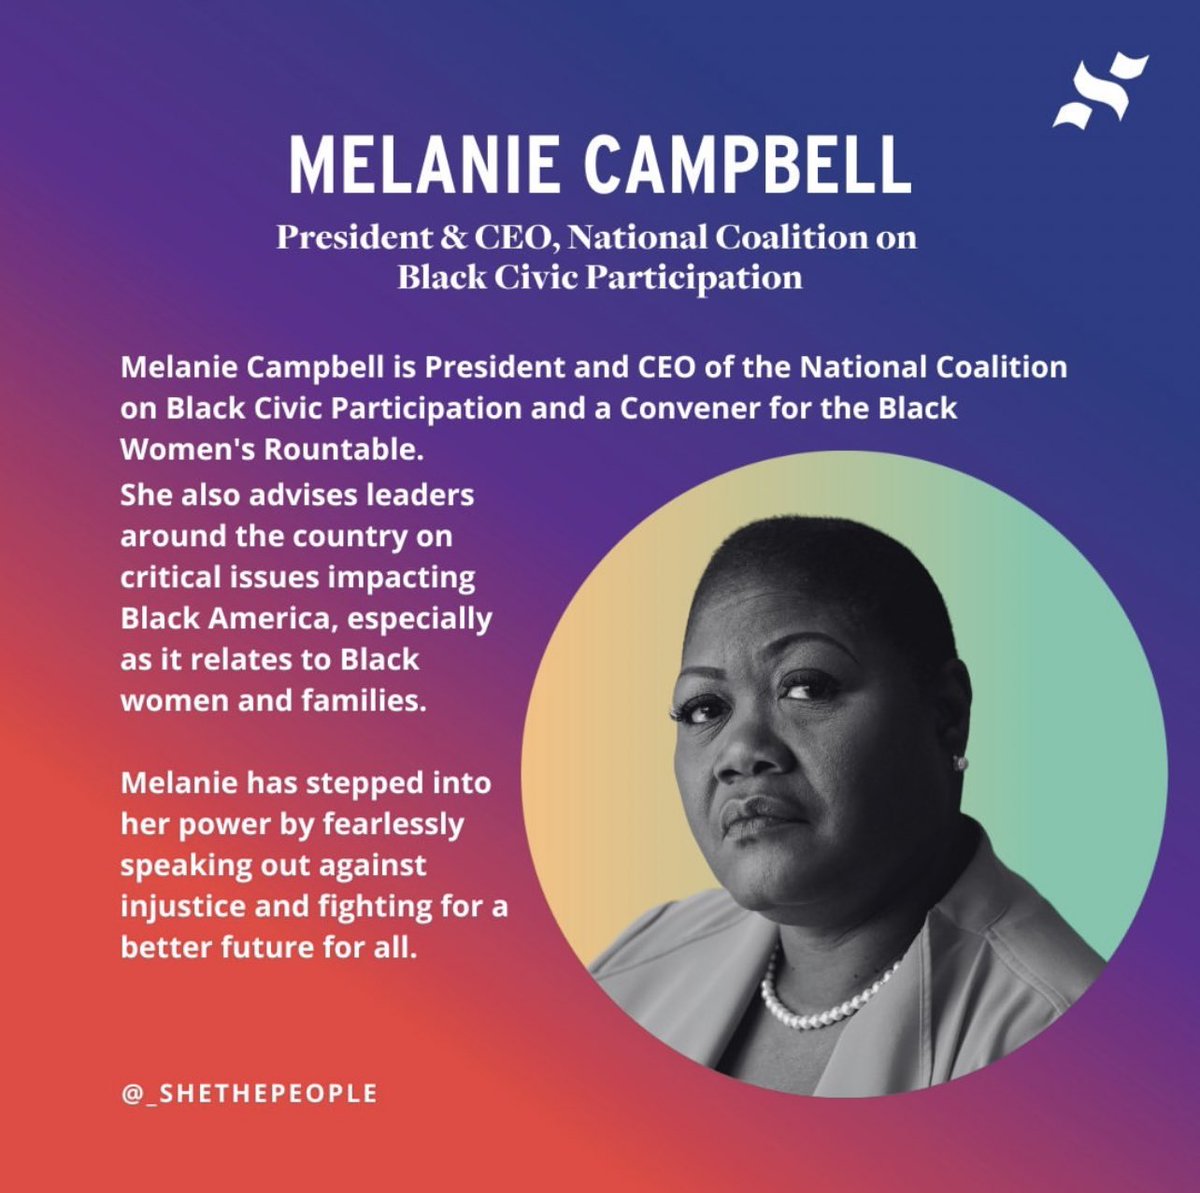 Thank you @_shethepeople for recognizing President & CEO of NCBCP, and the Convener of BWR, Melanie Campbell! #ncbcp #bwr #shethepeople #womenempowerment